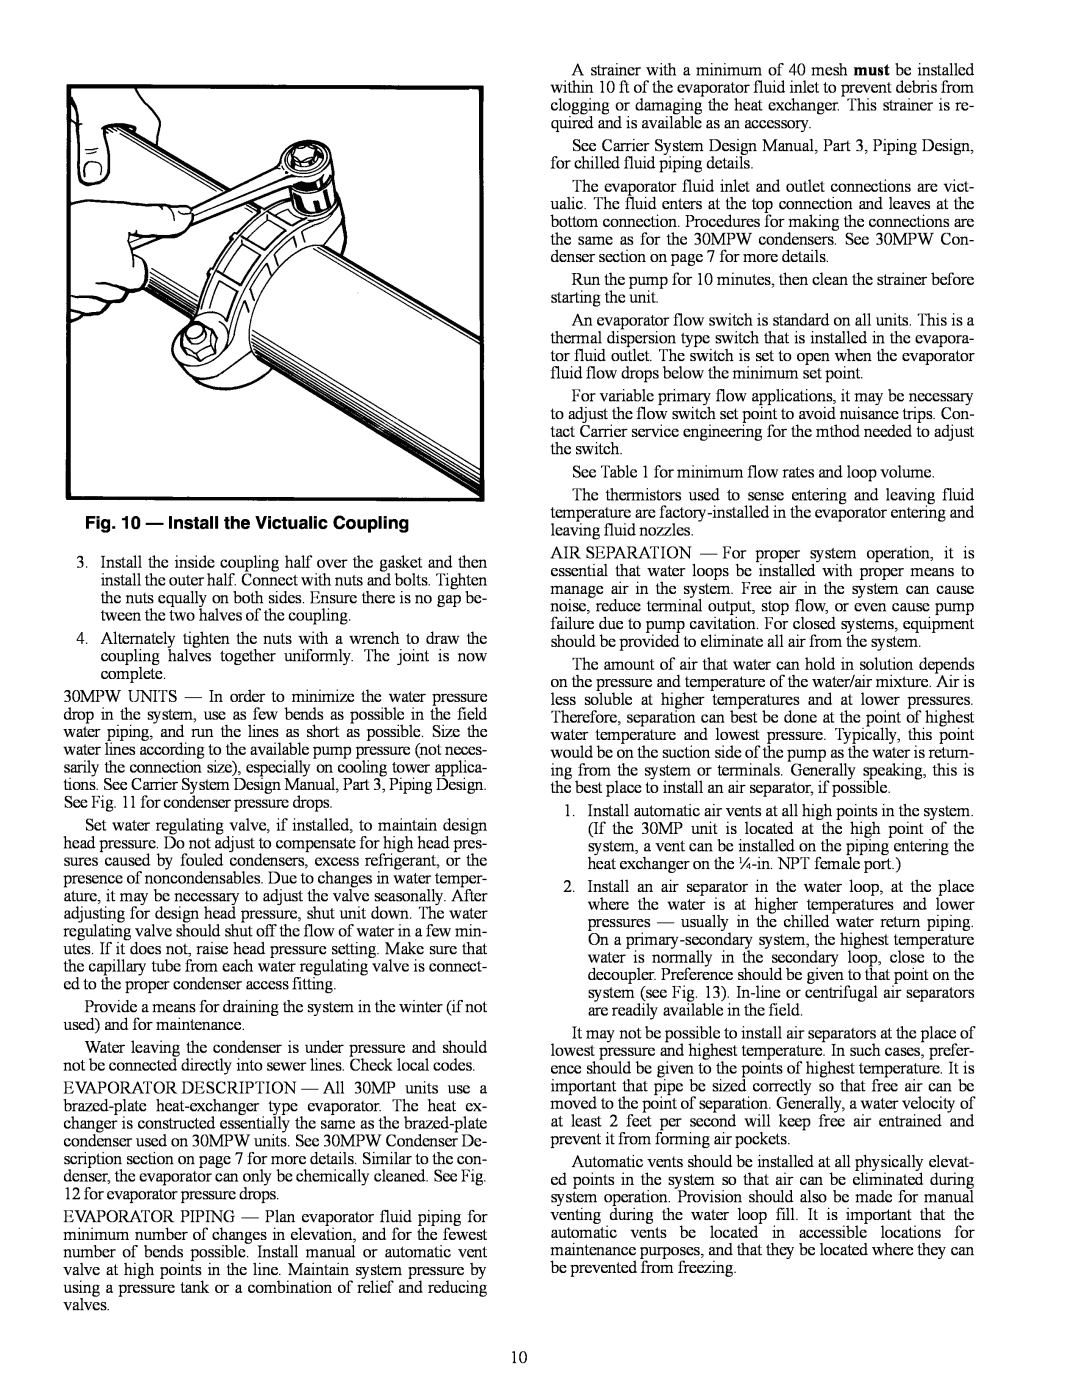 Carrier 30MPA installation instructions a30-1245, Install the Victualic Coupling 